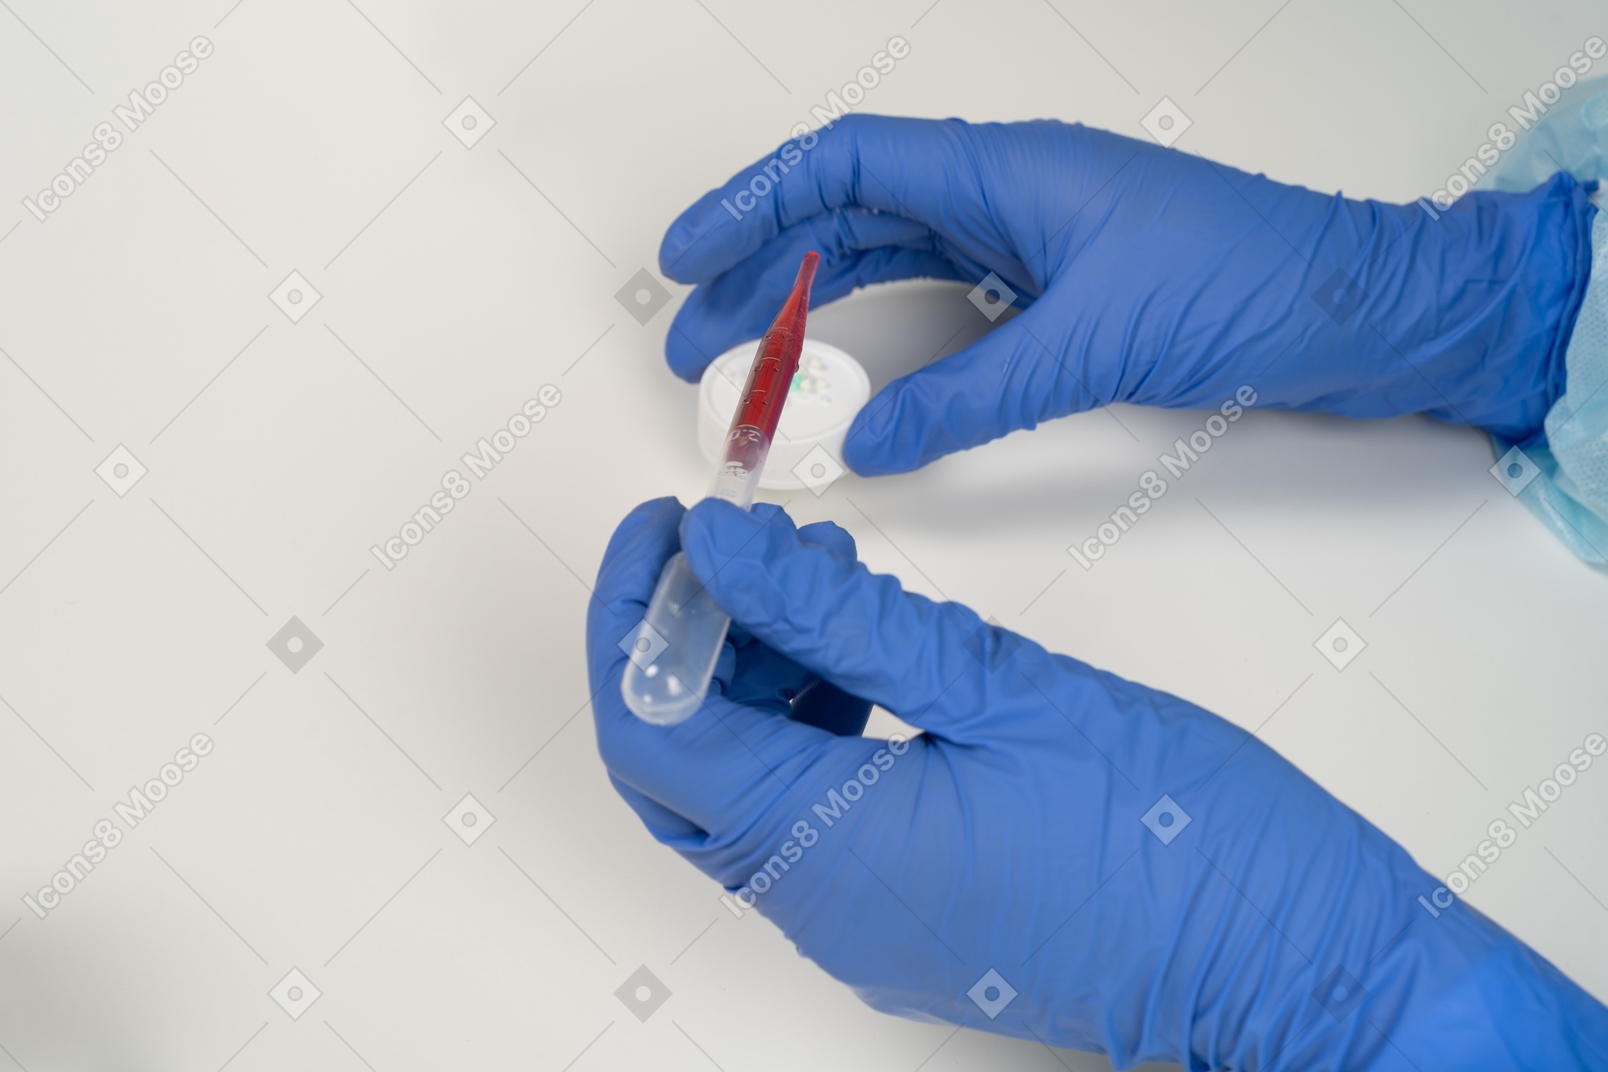 Hands in gloves and blood test